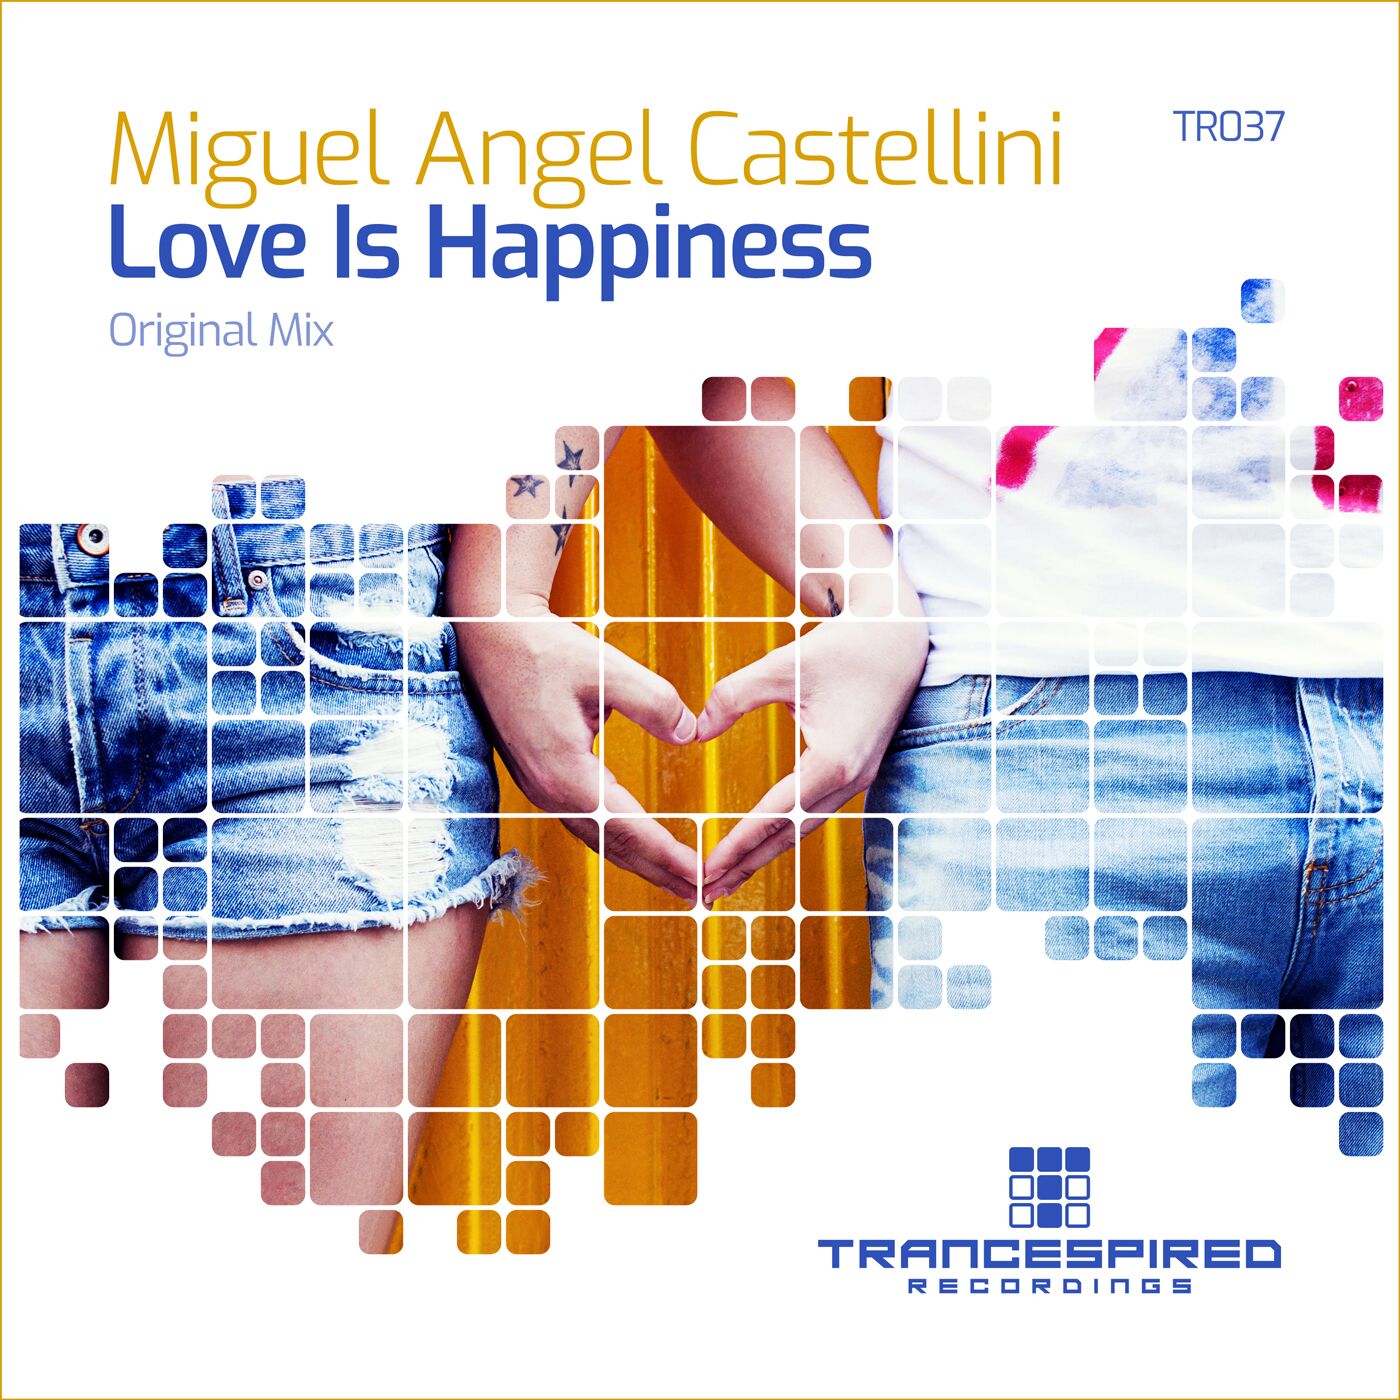 Miguel Angel Castellini presents Love Is Happiness on Trancespired Recordings